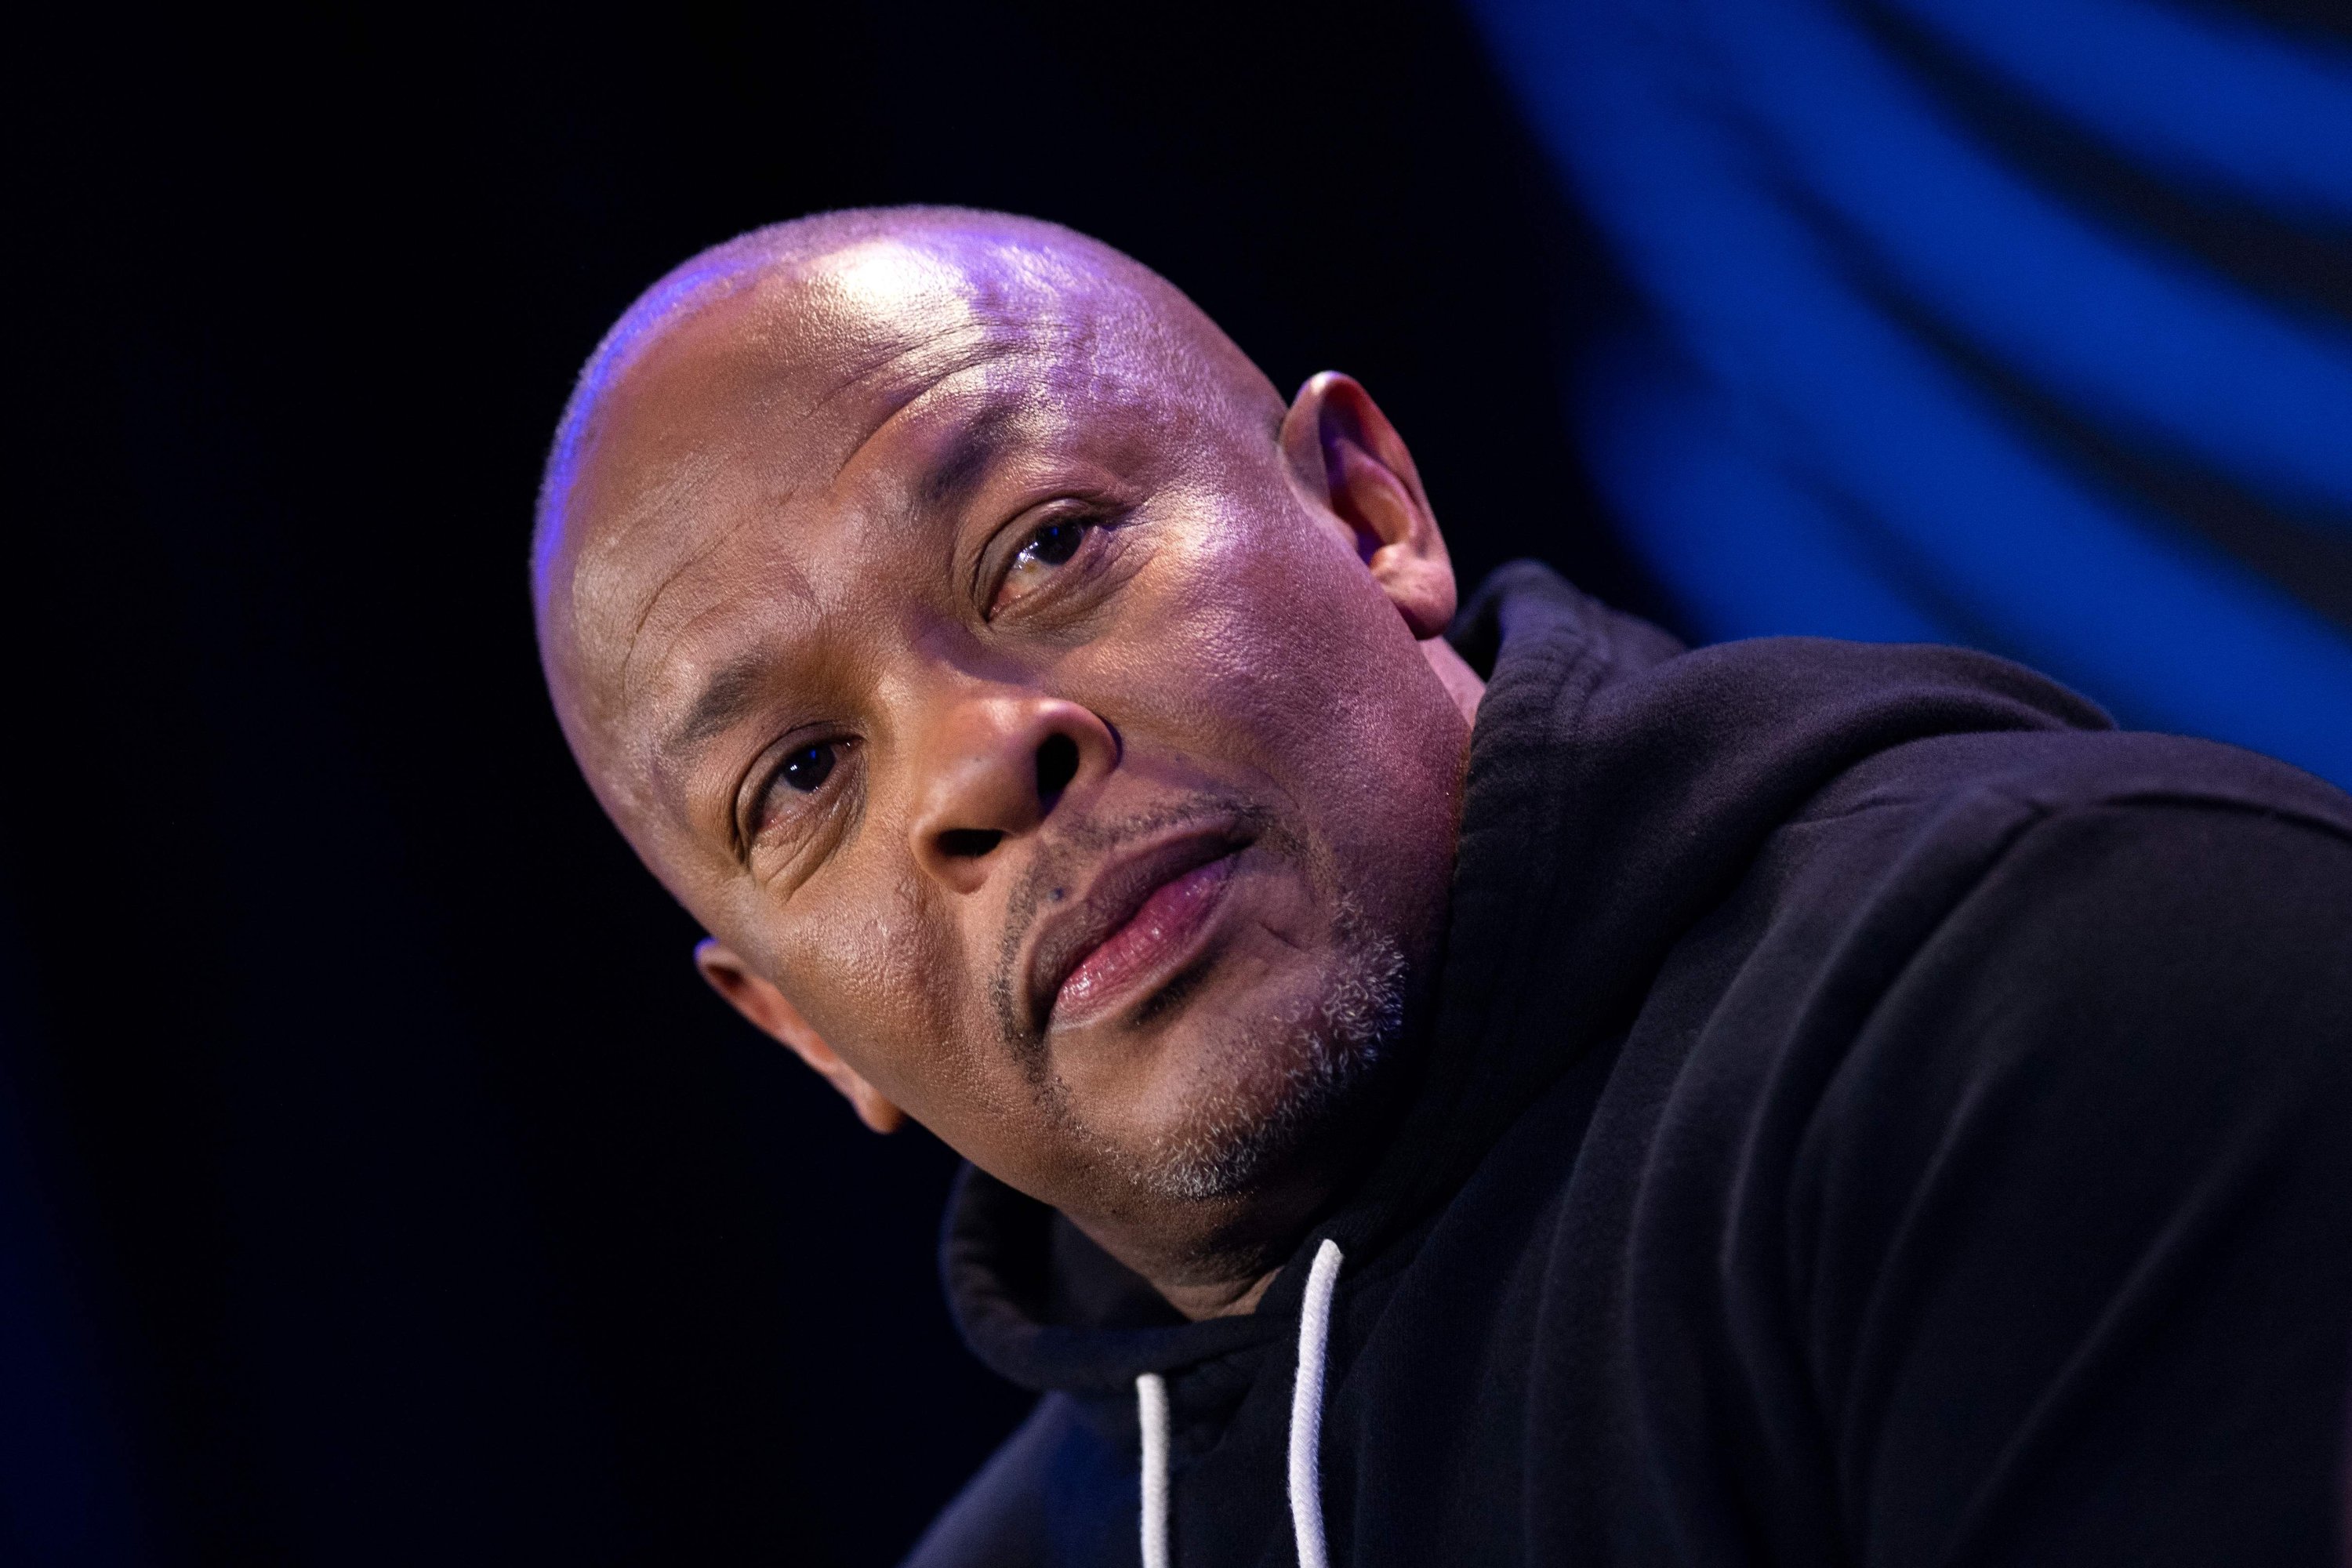 Rapper Dr. Dre attends the Pepsi Super Bowl LVI Halftime Show Press Conference at the convention Center, in Los Angeles, California, U.S., Feb. 10, 2022. (AFP Photo)